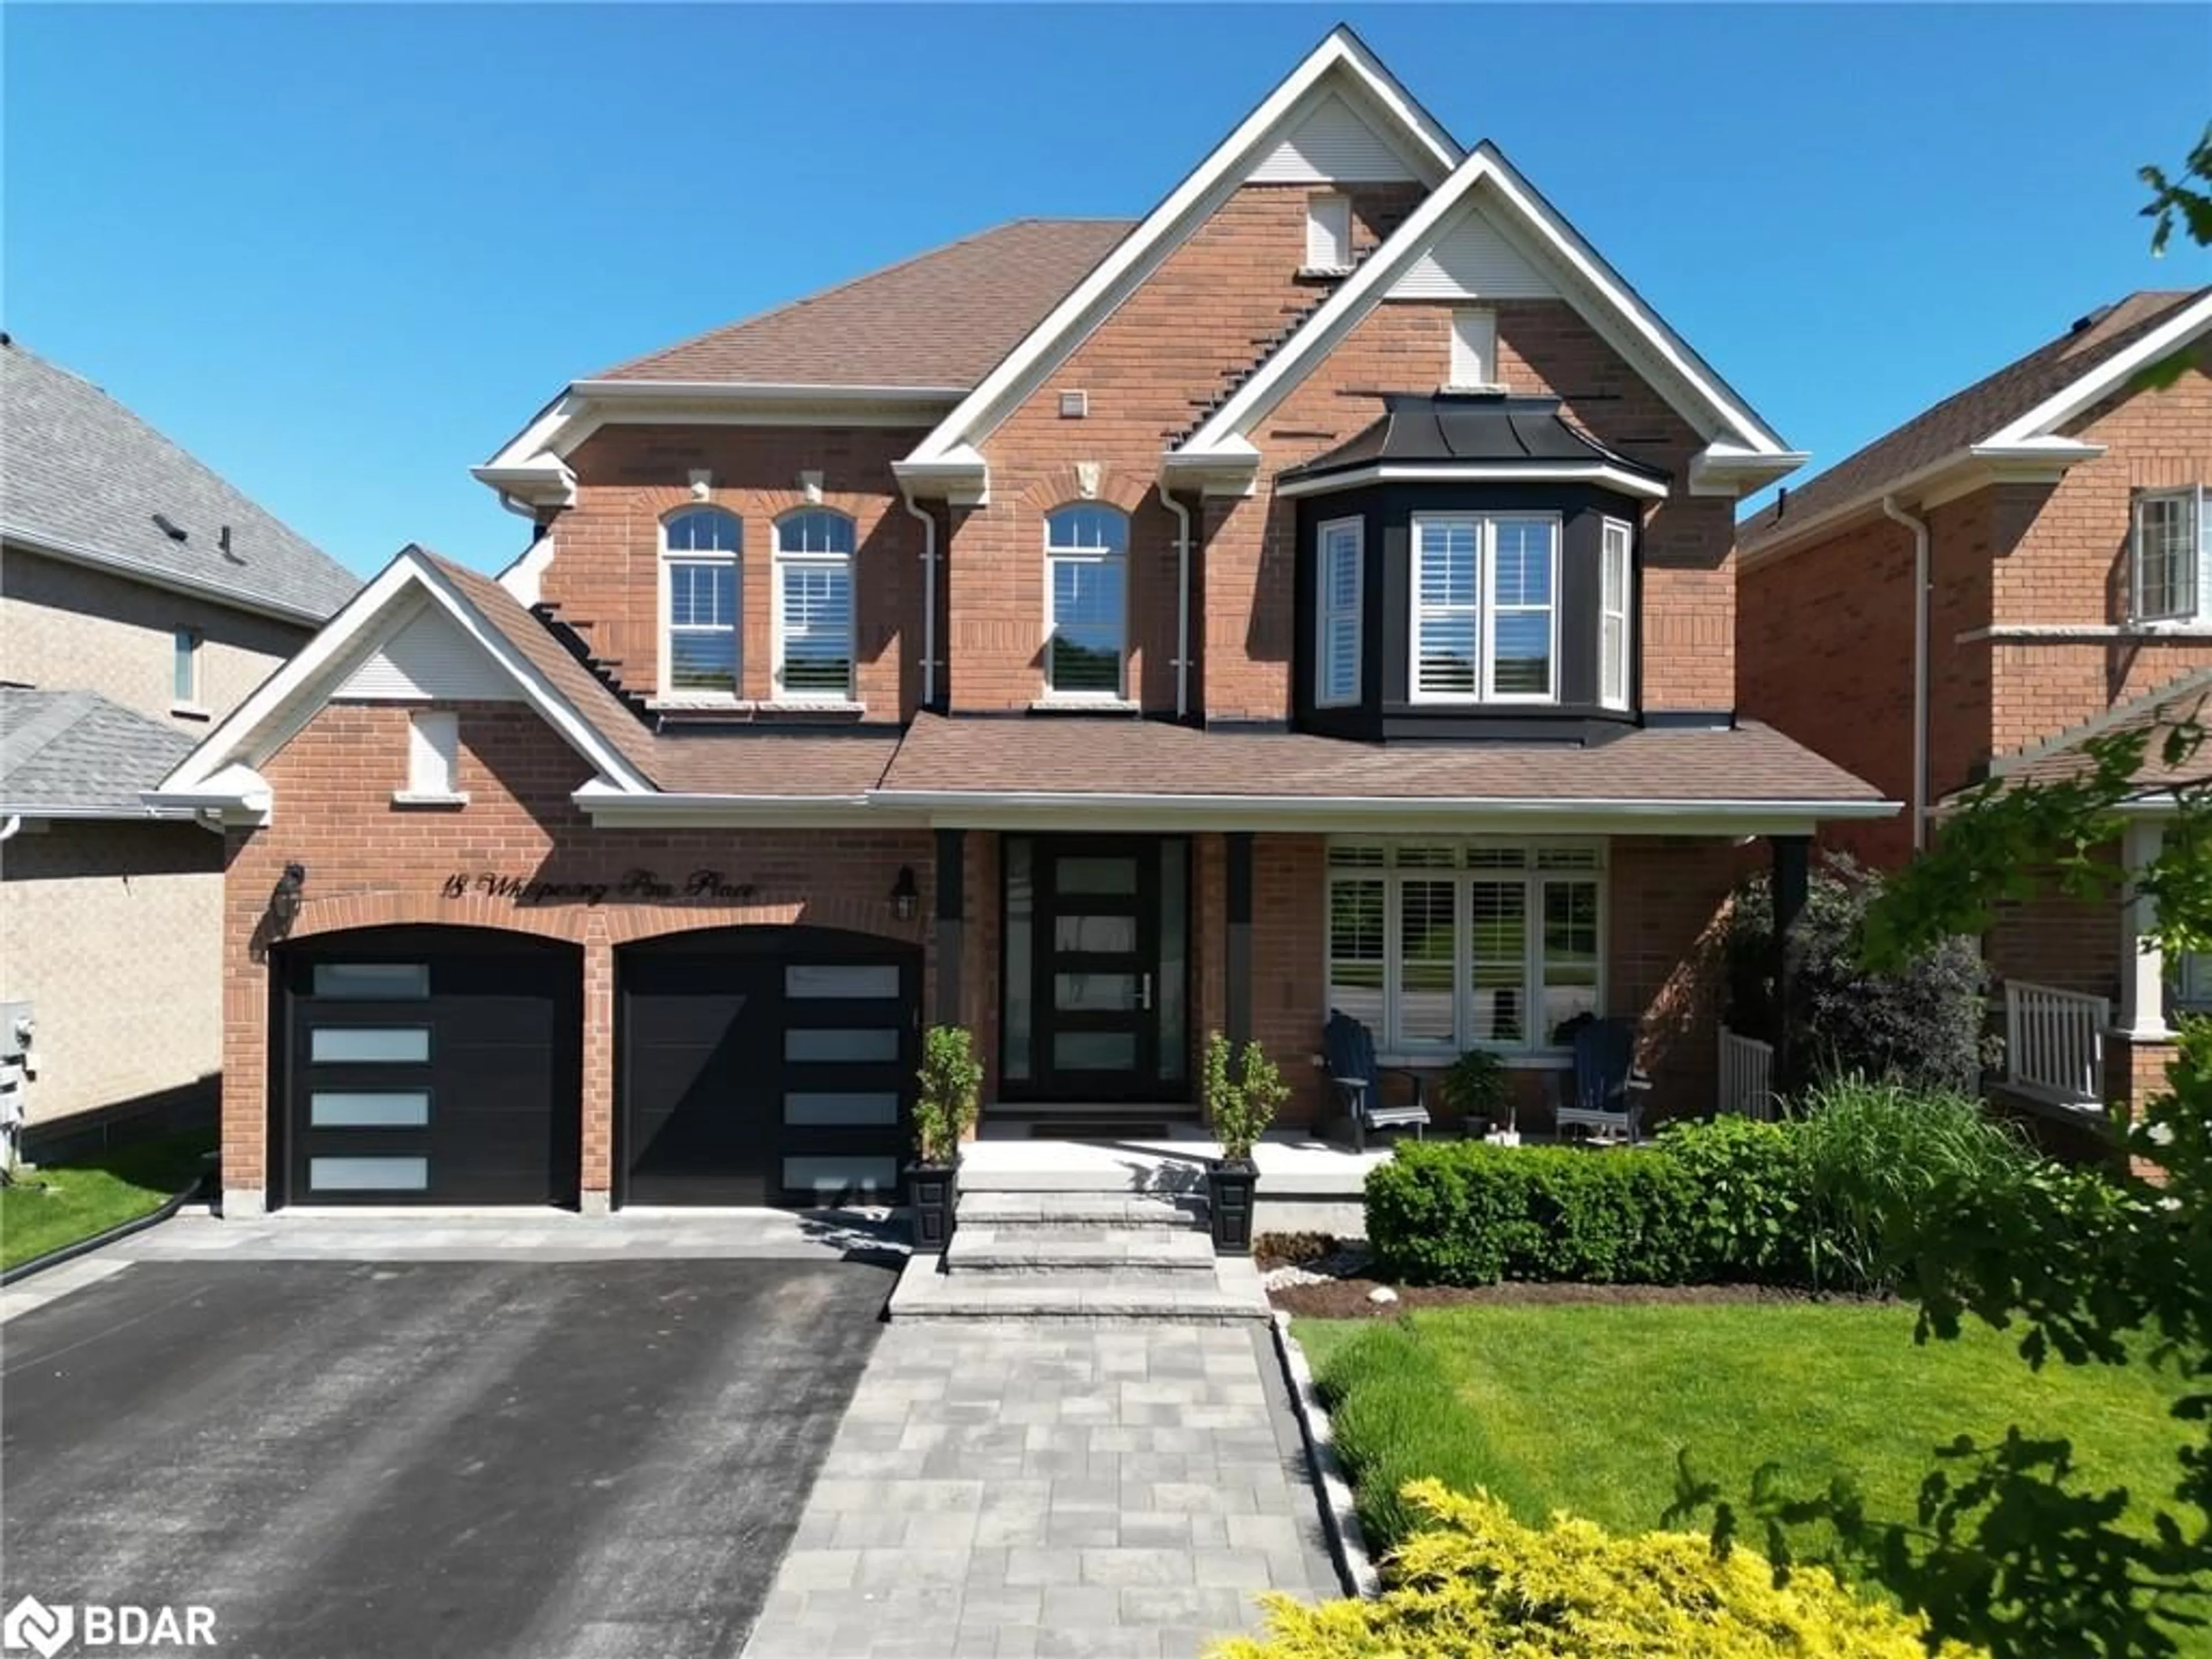 Home with brick exterior material for 18 Whispering Pine Pl, Barrie Ontario L4N 9R7